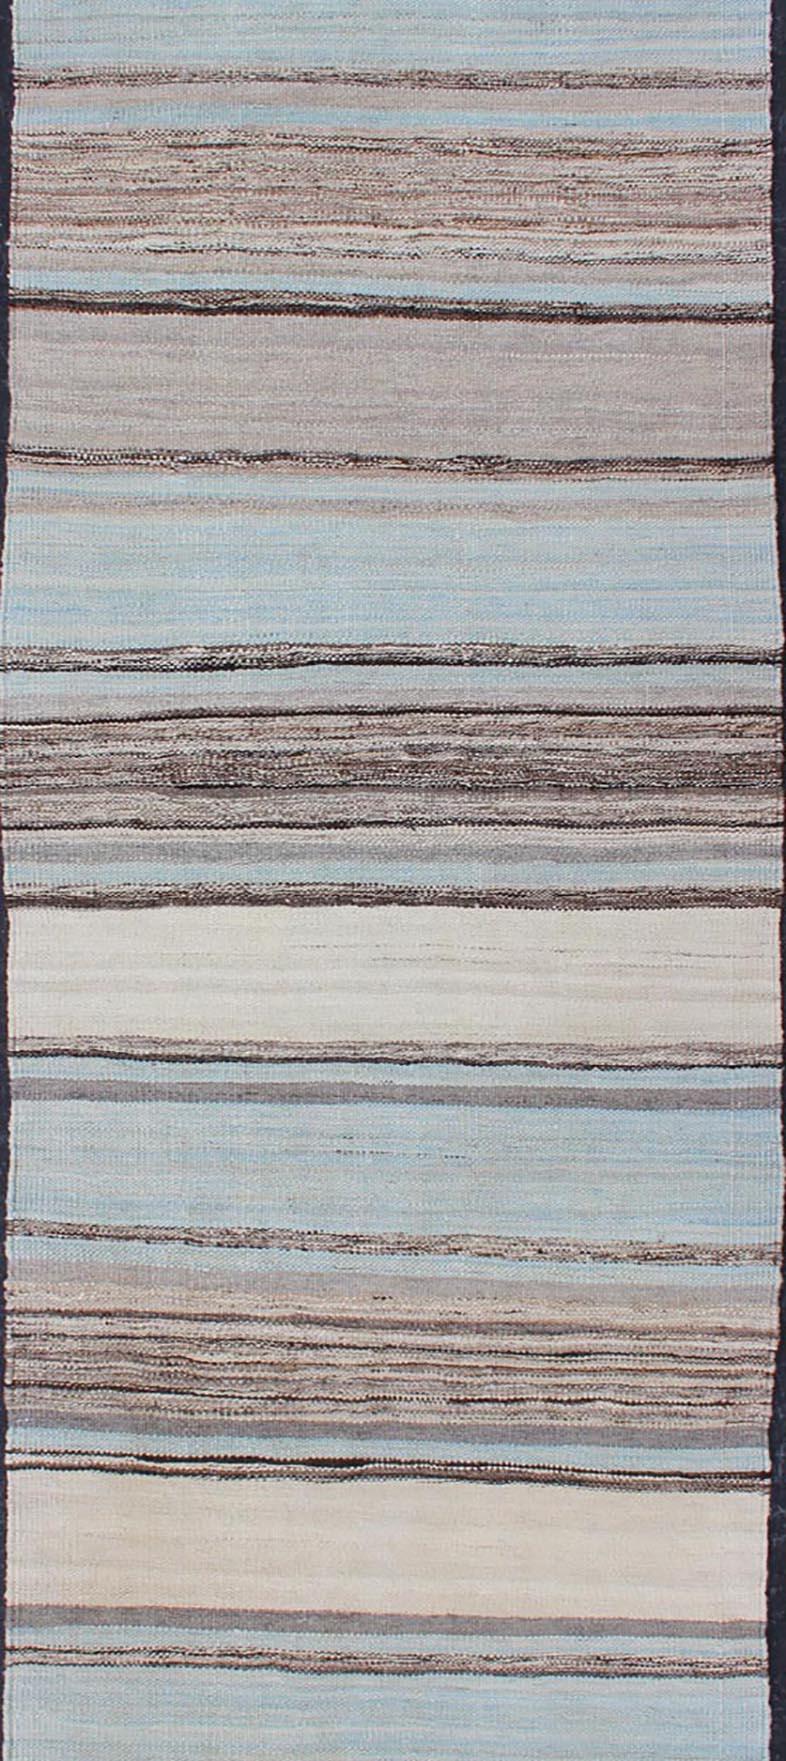 Hand-Woven Modern Kilim Rug with Stripes in Shades of Blue, Taupe, Brown, and Cream Runner For Sale